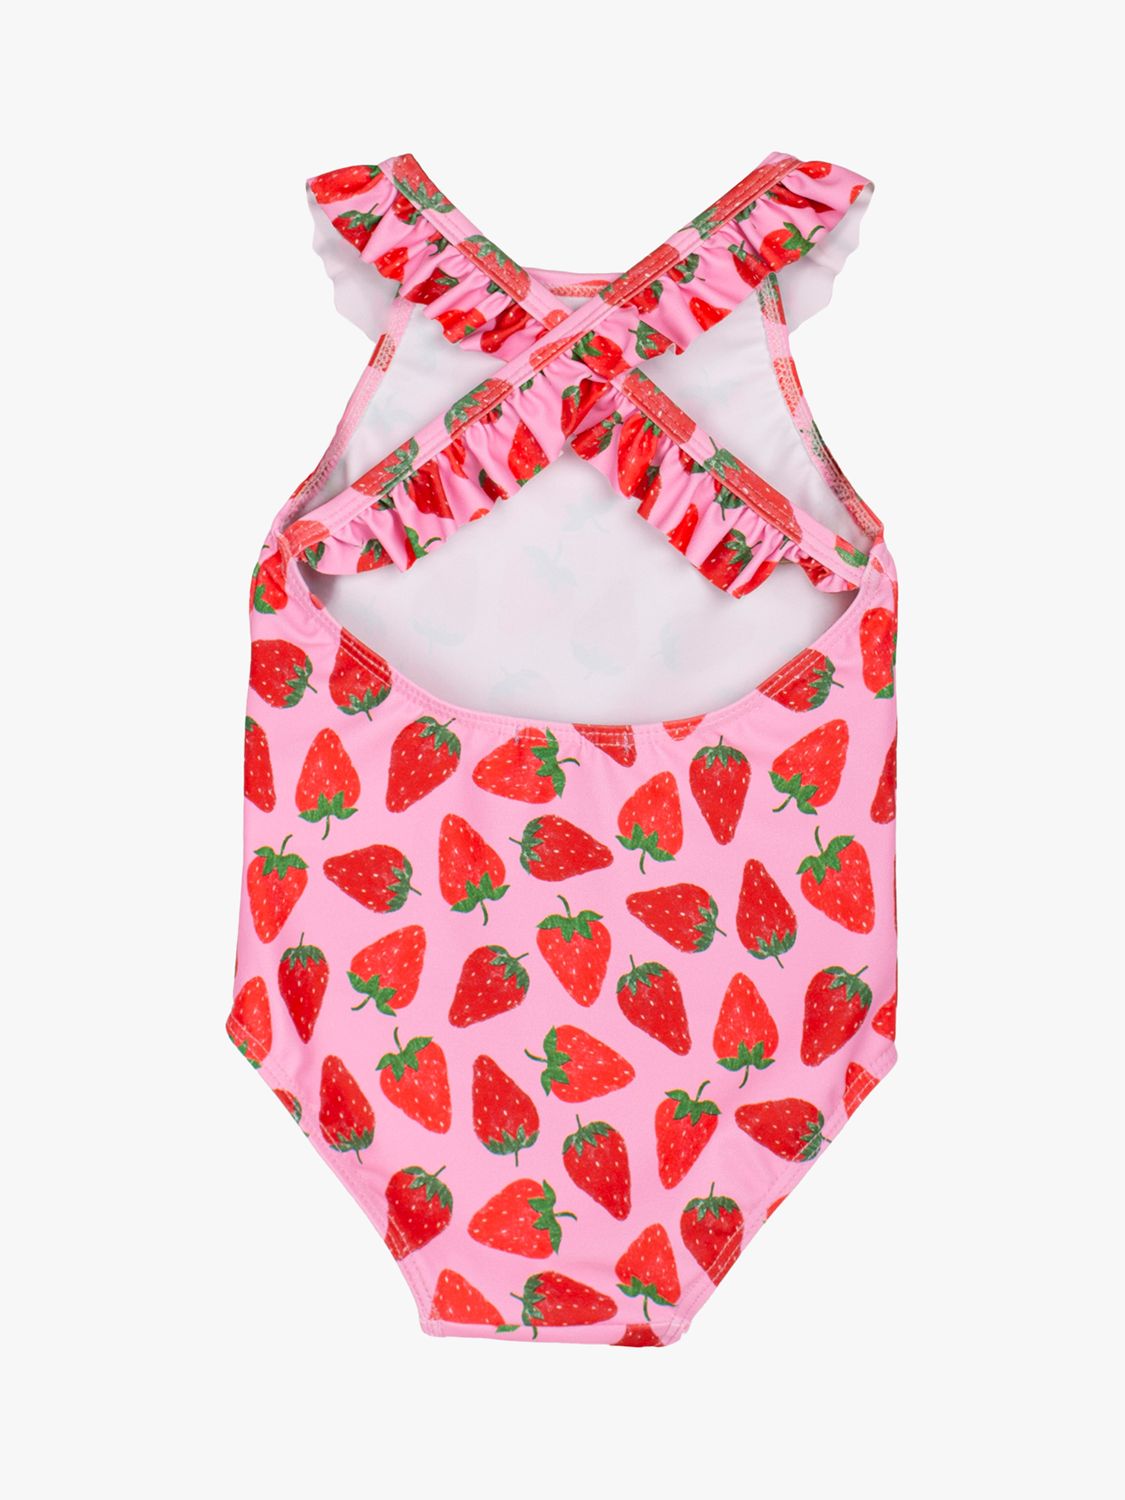 Trotters Baby Strawberry Print Frill Swimsuit, Pink/Strawberry, 3-6 months